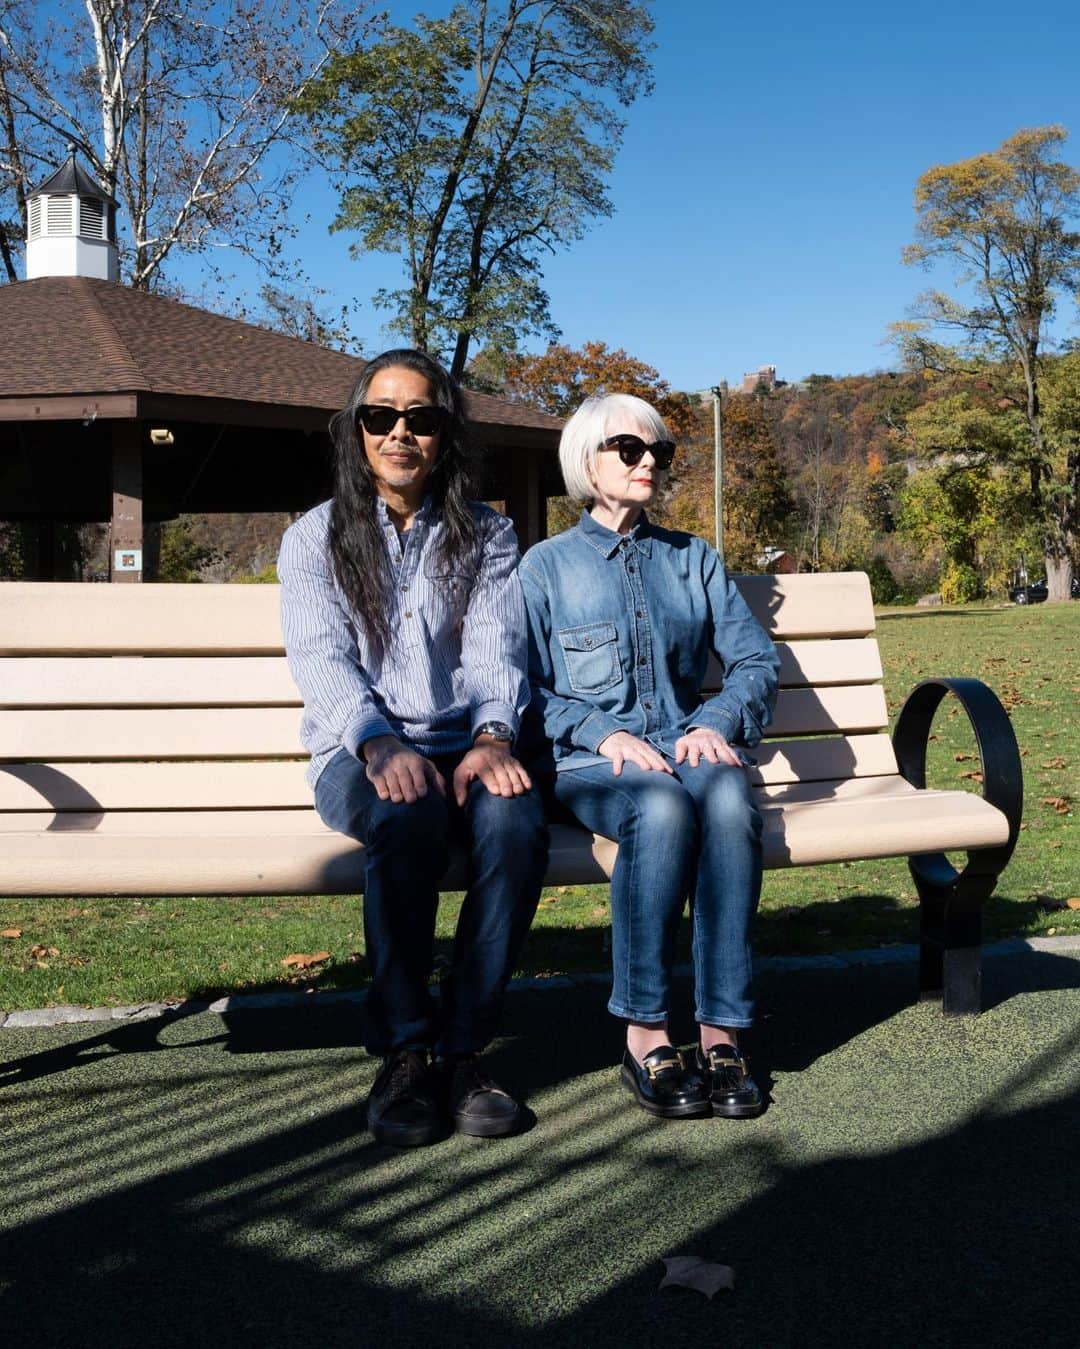 Accidental Iconのインスタグラム：「Vintage Hipster Couple on Bench, Peekskill, NY.  circa 2022.   Calvin and I were a little ahead of the hipsters who migrated to Williamsburg, Brooklyn during the late 1990’s. We rented a loft in a former burlap bag factory on the South side. We were on the first floor and our loft was two levels as it contained what was formerly the loading dock. We saw the river and the Williamsburg Bridge from our huge window near the kitchen. We smelt the sweet boiling sugar from the Domino Sugar Factory. In our 40’s It felt like a place that was becoming, so were we.  My daughter left for college and we had room in our lives to fill. At around the same time I started a Ph.D program and Calvin began an MFA in Creative Writing. My home away from home was the bookstore Spoonbill and Sugartown where I could read about art and whatever postmodern philosopher was captivating me at the moment. Calvin hung out at Main Drag Music with other guitar heads. There were only a few places to eat. Mostly near the Bedford L subway station. There was a performance space called Galapogos, a former mayonnaise factory with a reflecting pool that was our cultural hub.  Calvin built a workspace the length of the sunken section of the loft where we worked side by side; alone but together. Bookshelves above went all the way to the 14 foot ceilings. While living there, Calvin named us the vintage hipsters.   While we were part of the first wave of gentrifiers, the second overwhelming tide found our small loft building surrounded by much taller ones blocking our view. Mice from all the construction scampered across the wide, pine floor boards at random times of night and day. We sadly left our beloved loft and headed to another site of becoming: Long Island City.  Eventually we landed in Manhattan.  So here we sit in Peekskill, now in our 60’s and in another place that’s becoming. It will be exciting to see what will become of us here. Because we are a couple that’s always becoming. Who will you become?  #vintagehipsters #becoming #evolving #reinventing #thecouplealwaysbecoming #williamsburg」